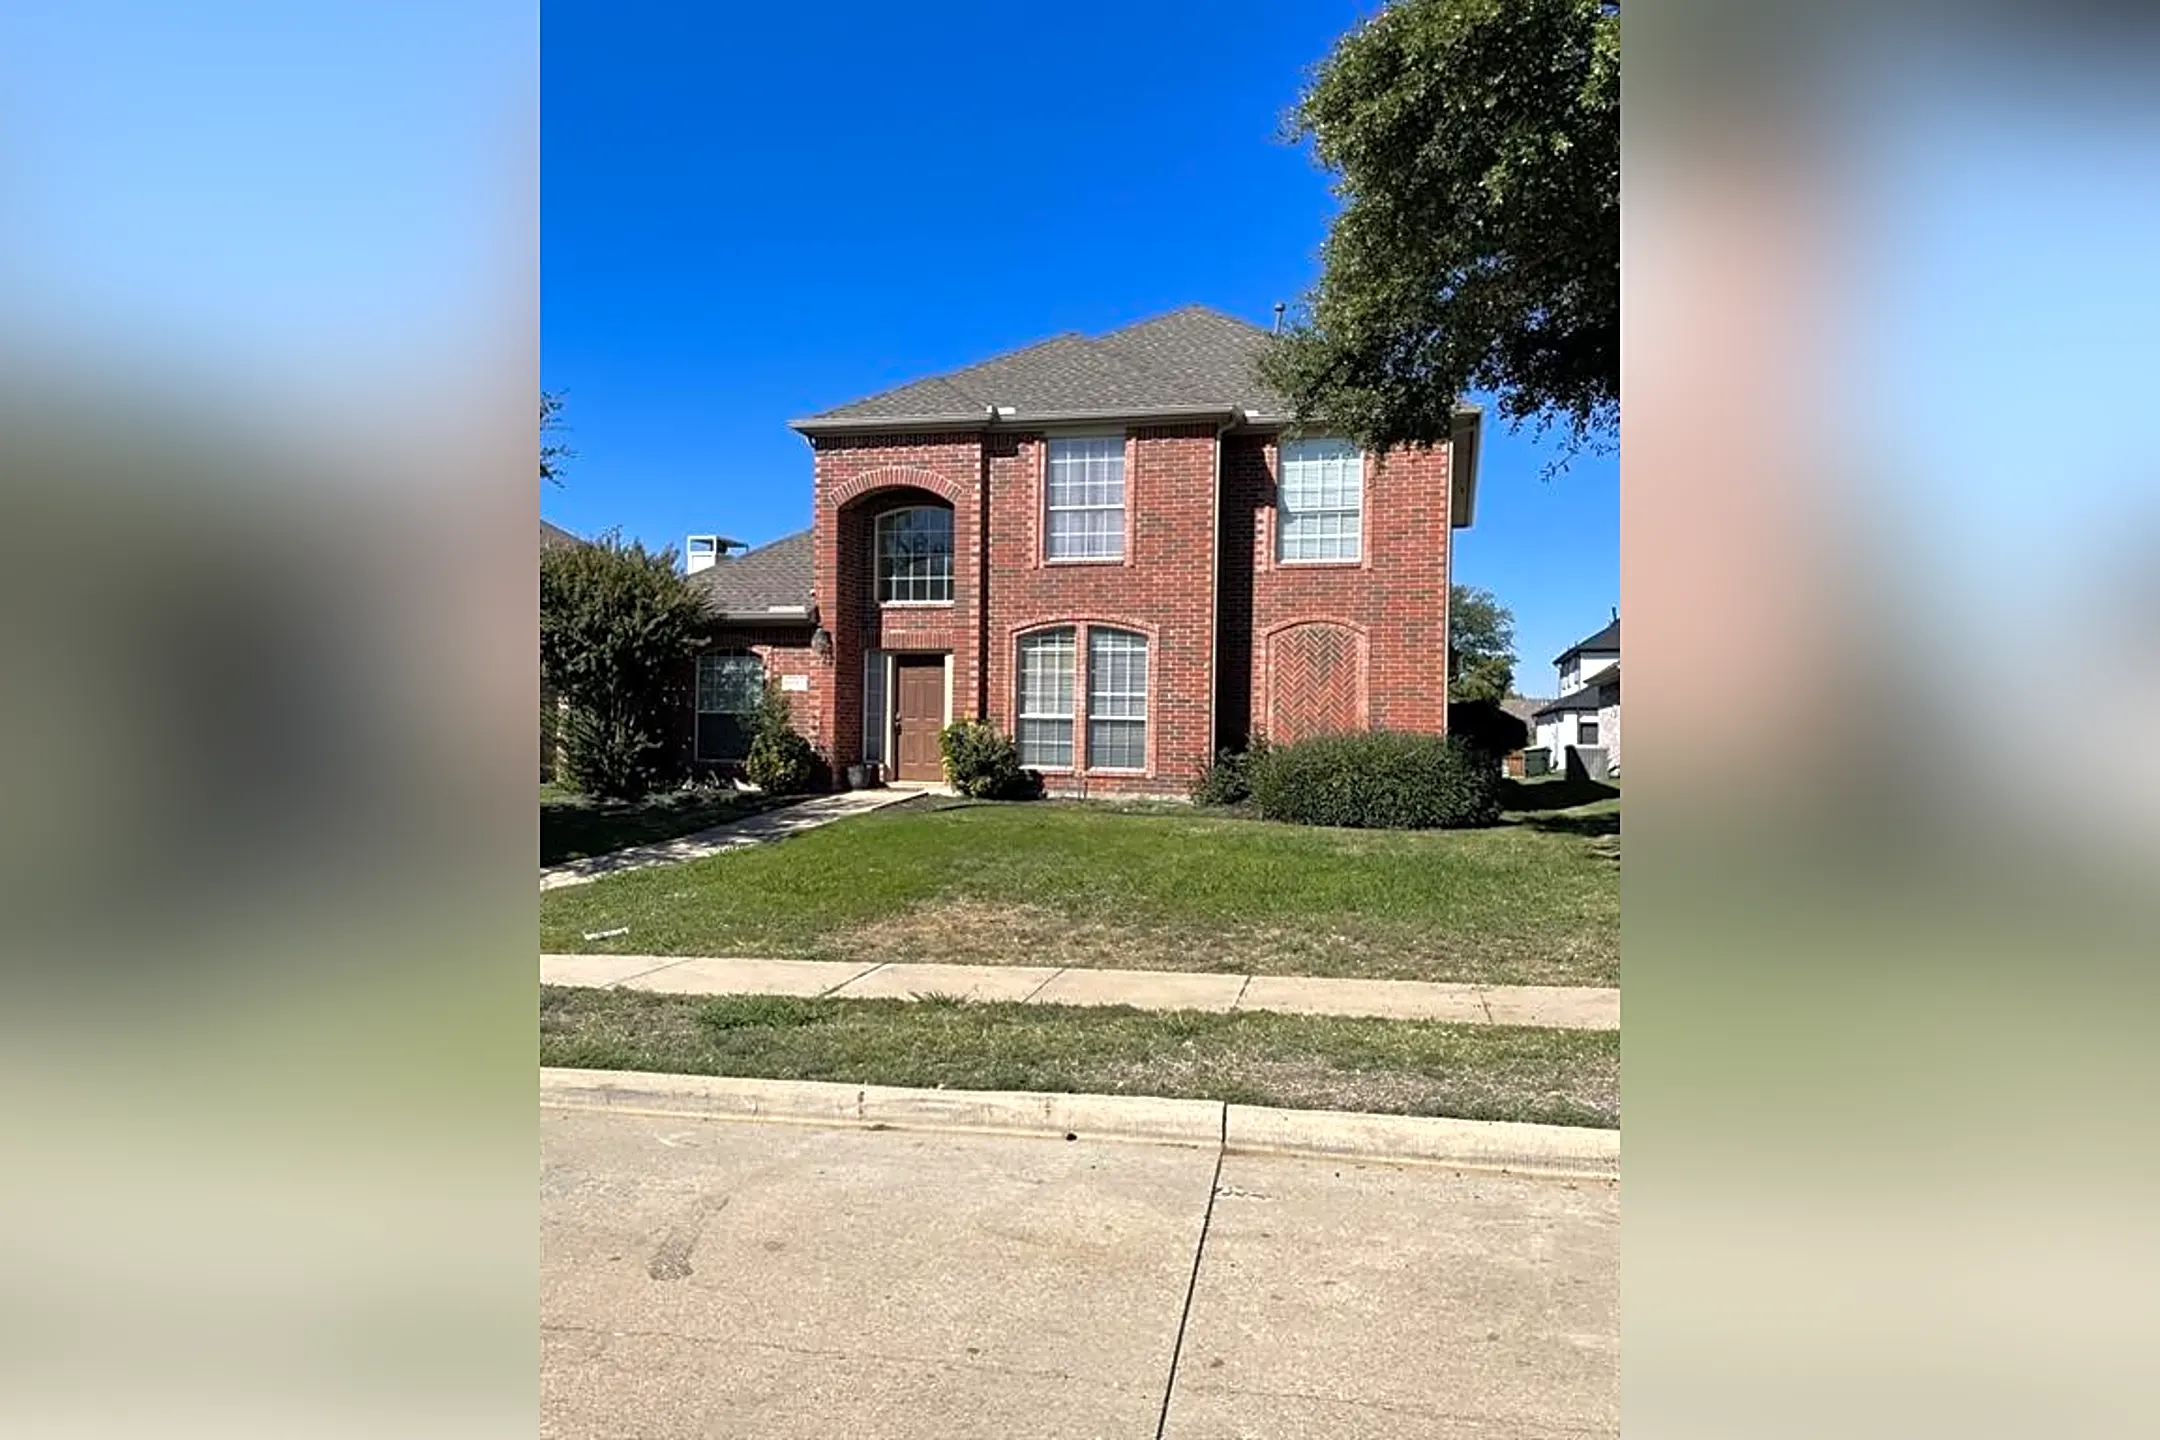 Building - 3929 Windford Dr - Plano, TX